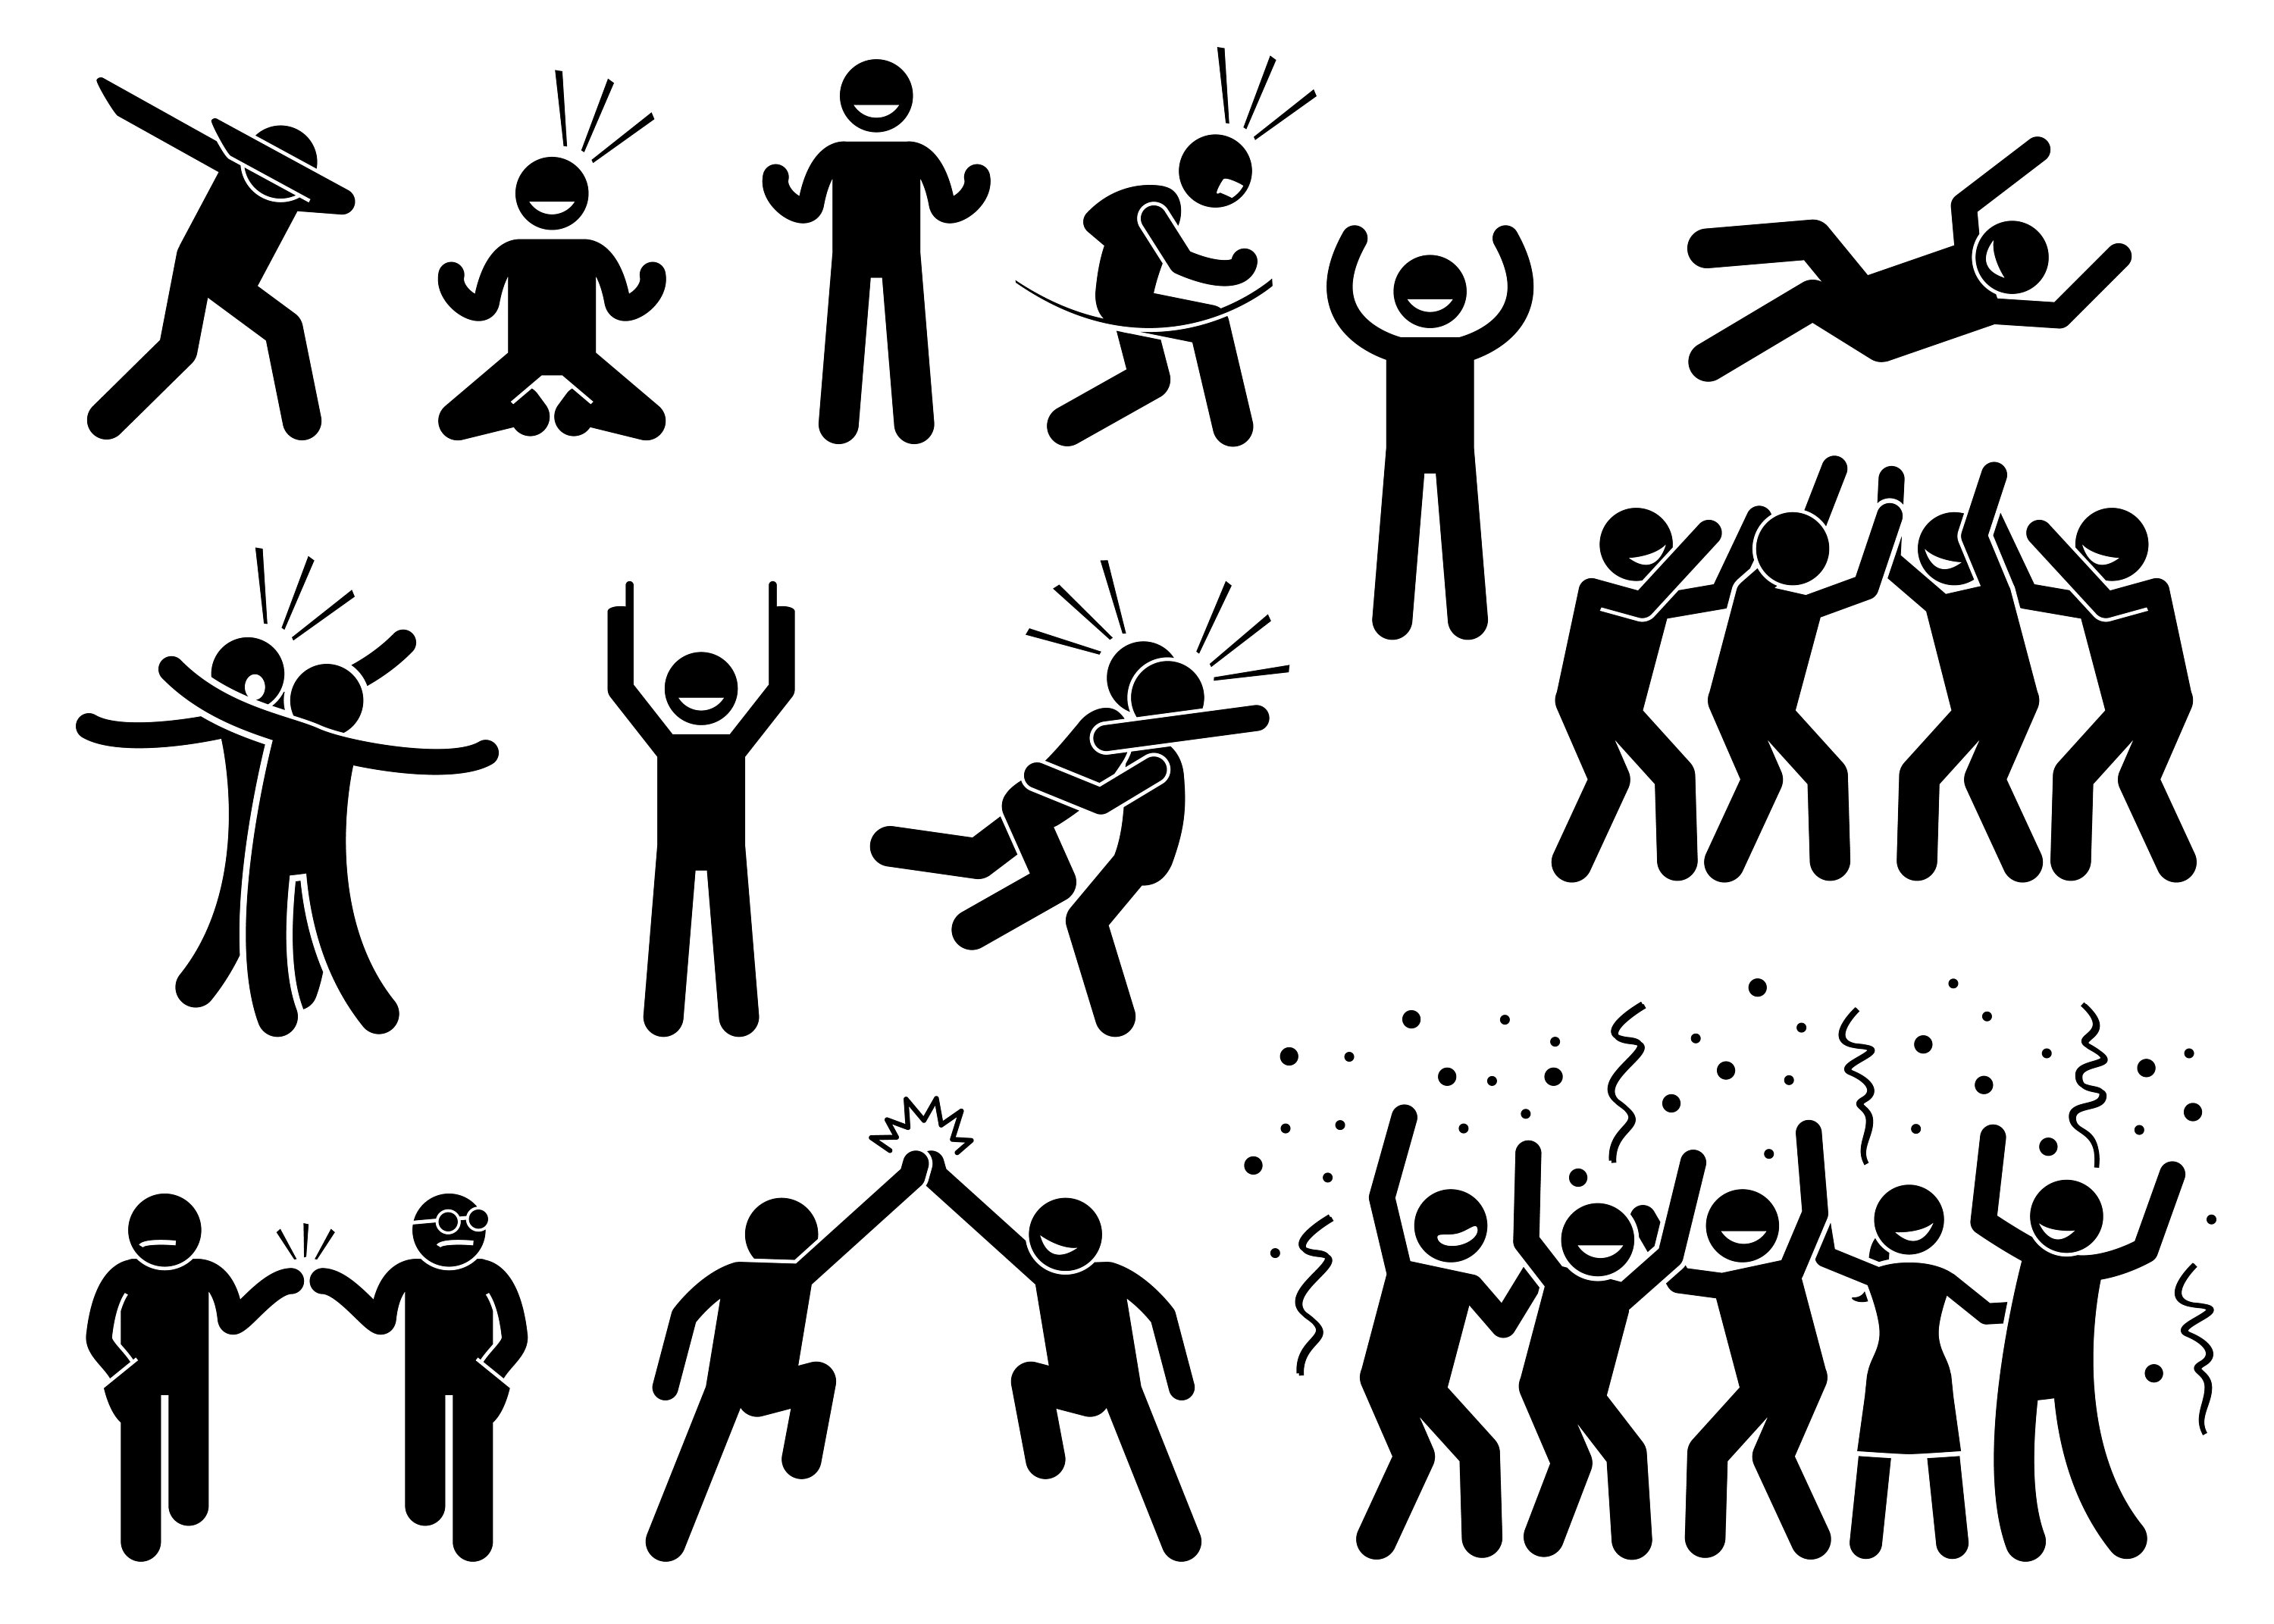 Success SVG, High Five EPS, Dab Vector, Dabbing PNG, Stick Figures Silhouet...